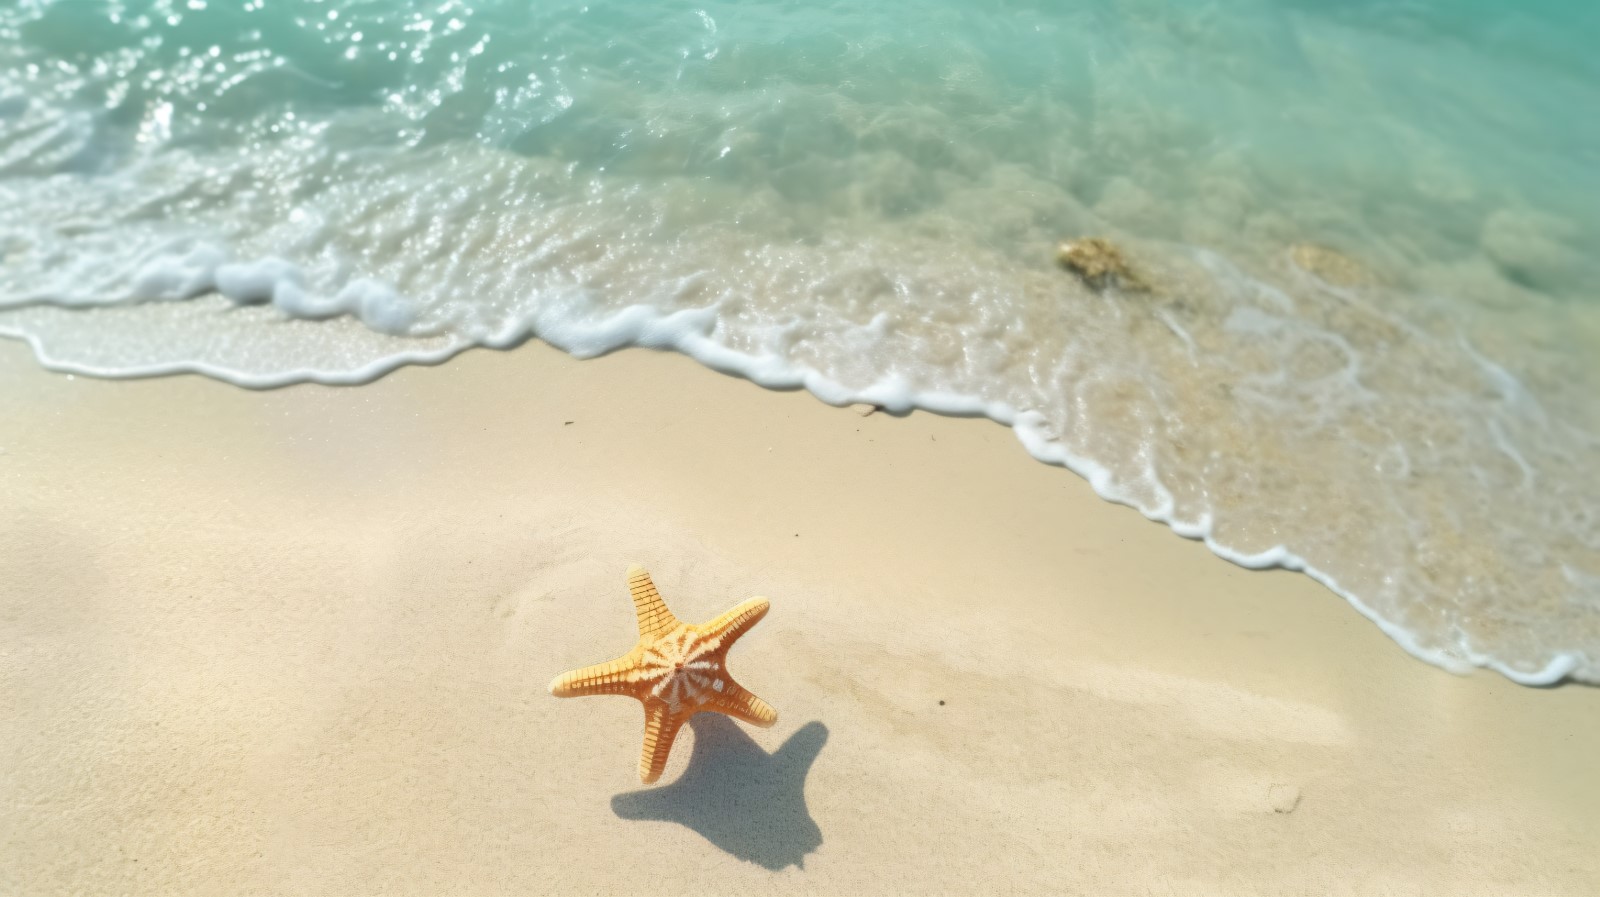 Starfish and seashell on the sandy beach in sea water 371